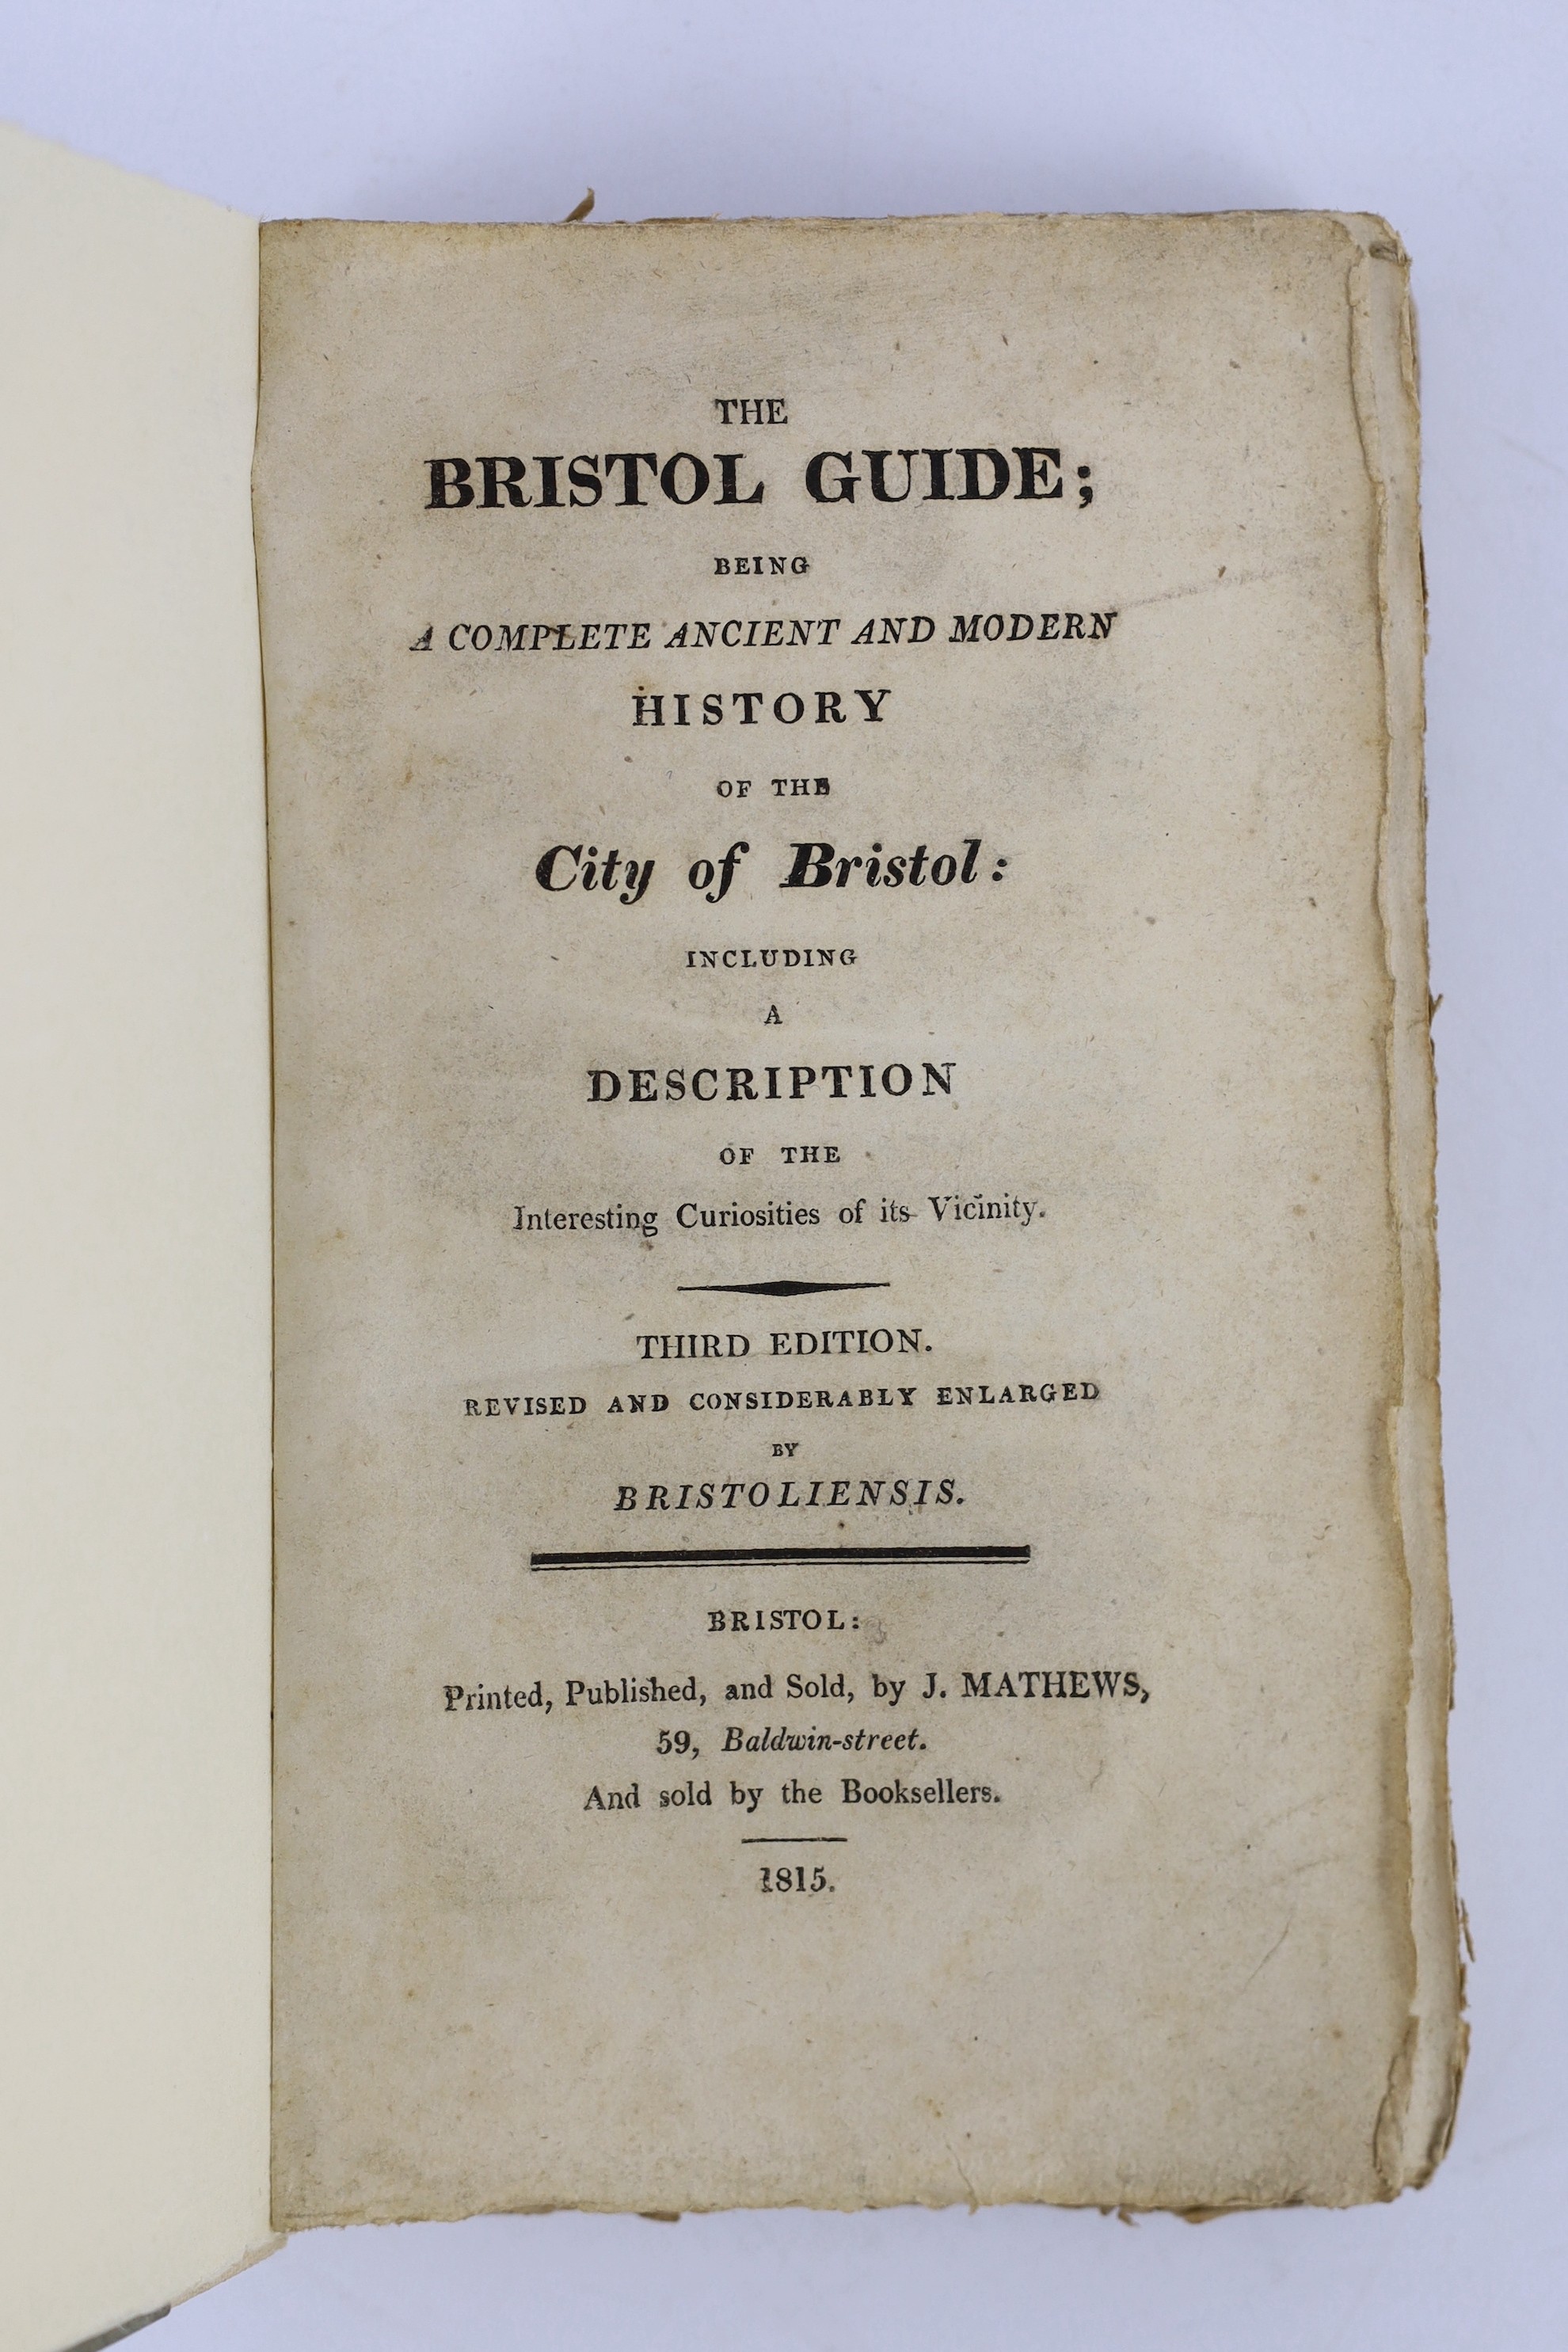 SOMERSET, BRISTOL: Bristoliensis - The Bristol Guide including a Description of the Curiosities of its Vicinity. 3rd edition revised and considerably enlarged. original paperboards, rebacked cloth, retaining most of orig